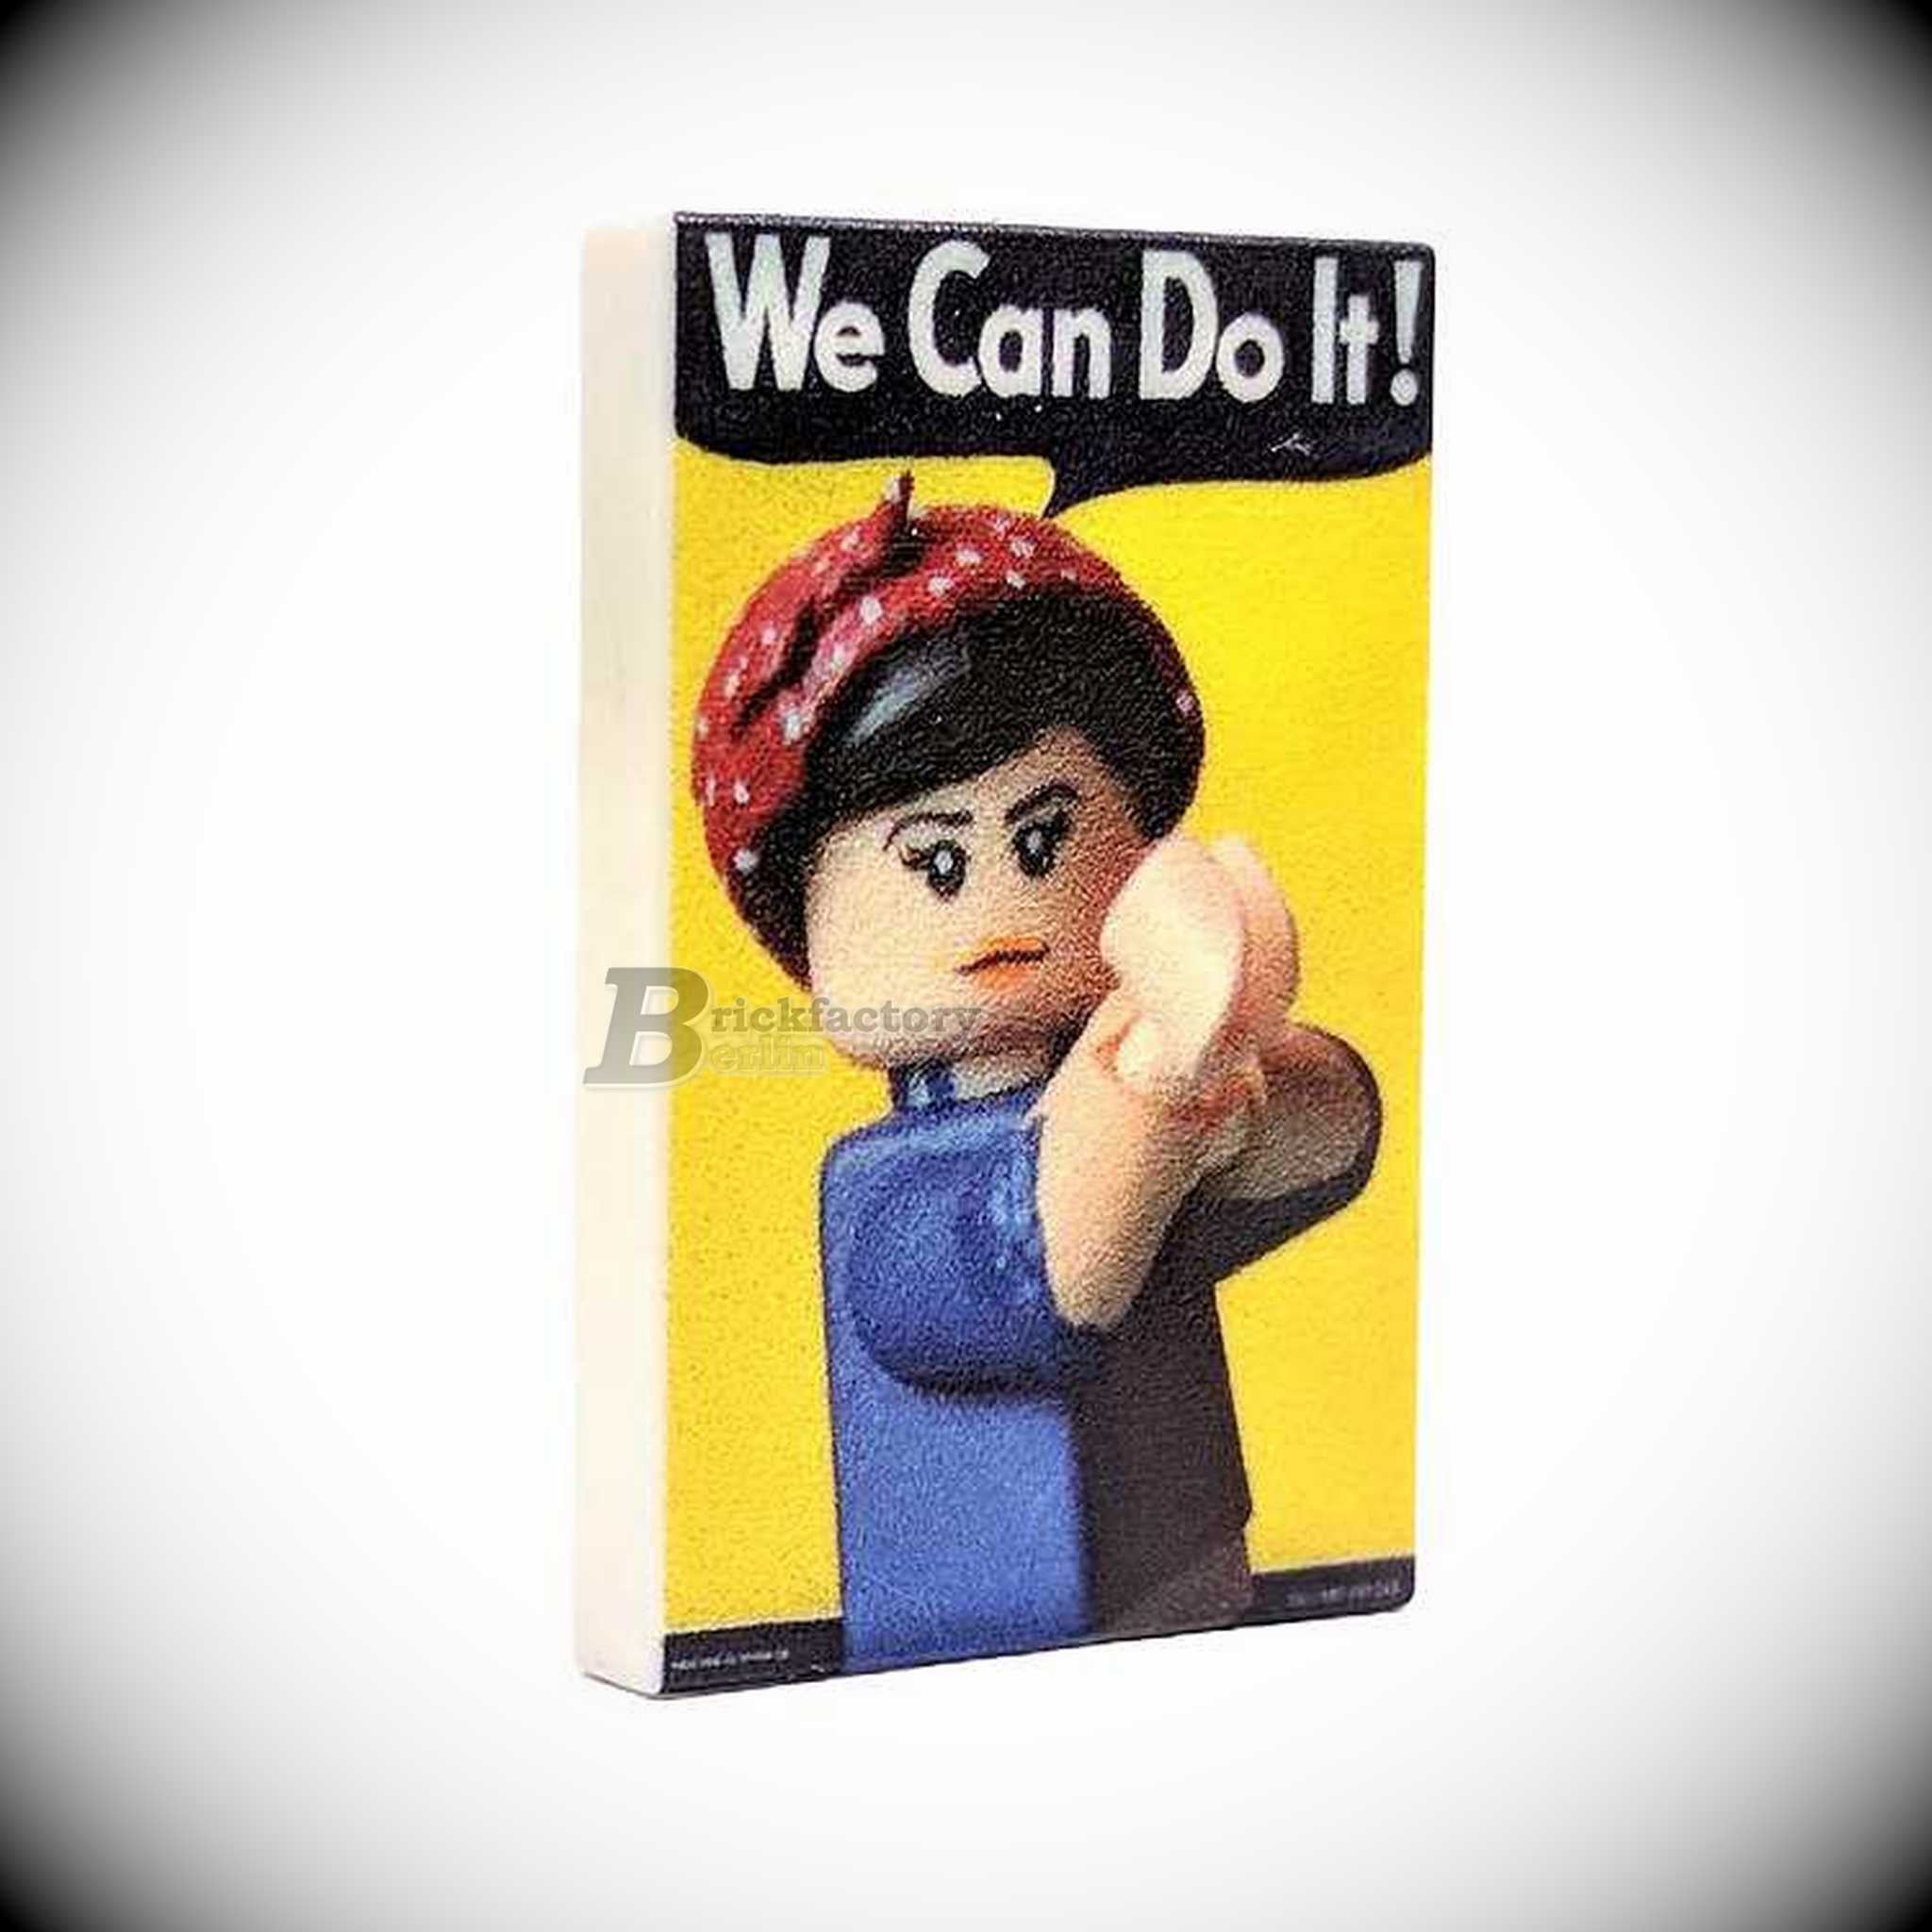 BF-0371 Valiant Bricks printed 2x3 tile "We can do it" made from LEGO® parts